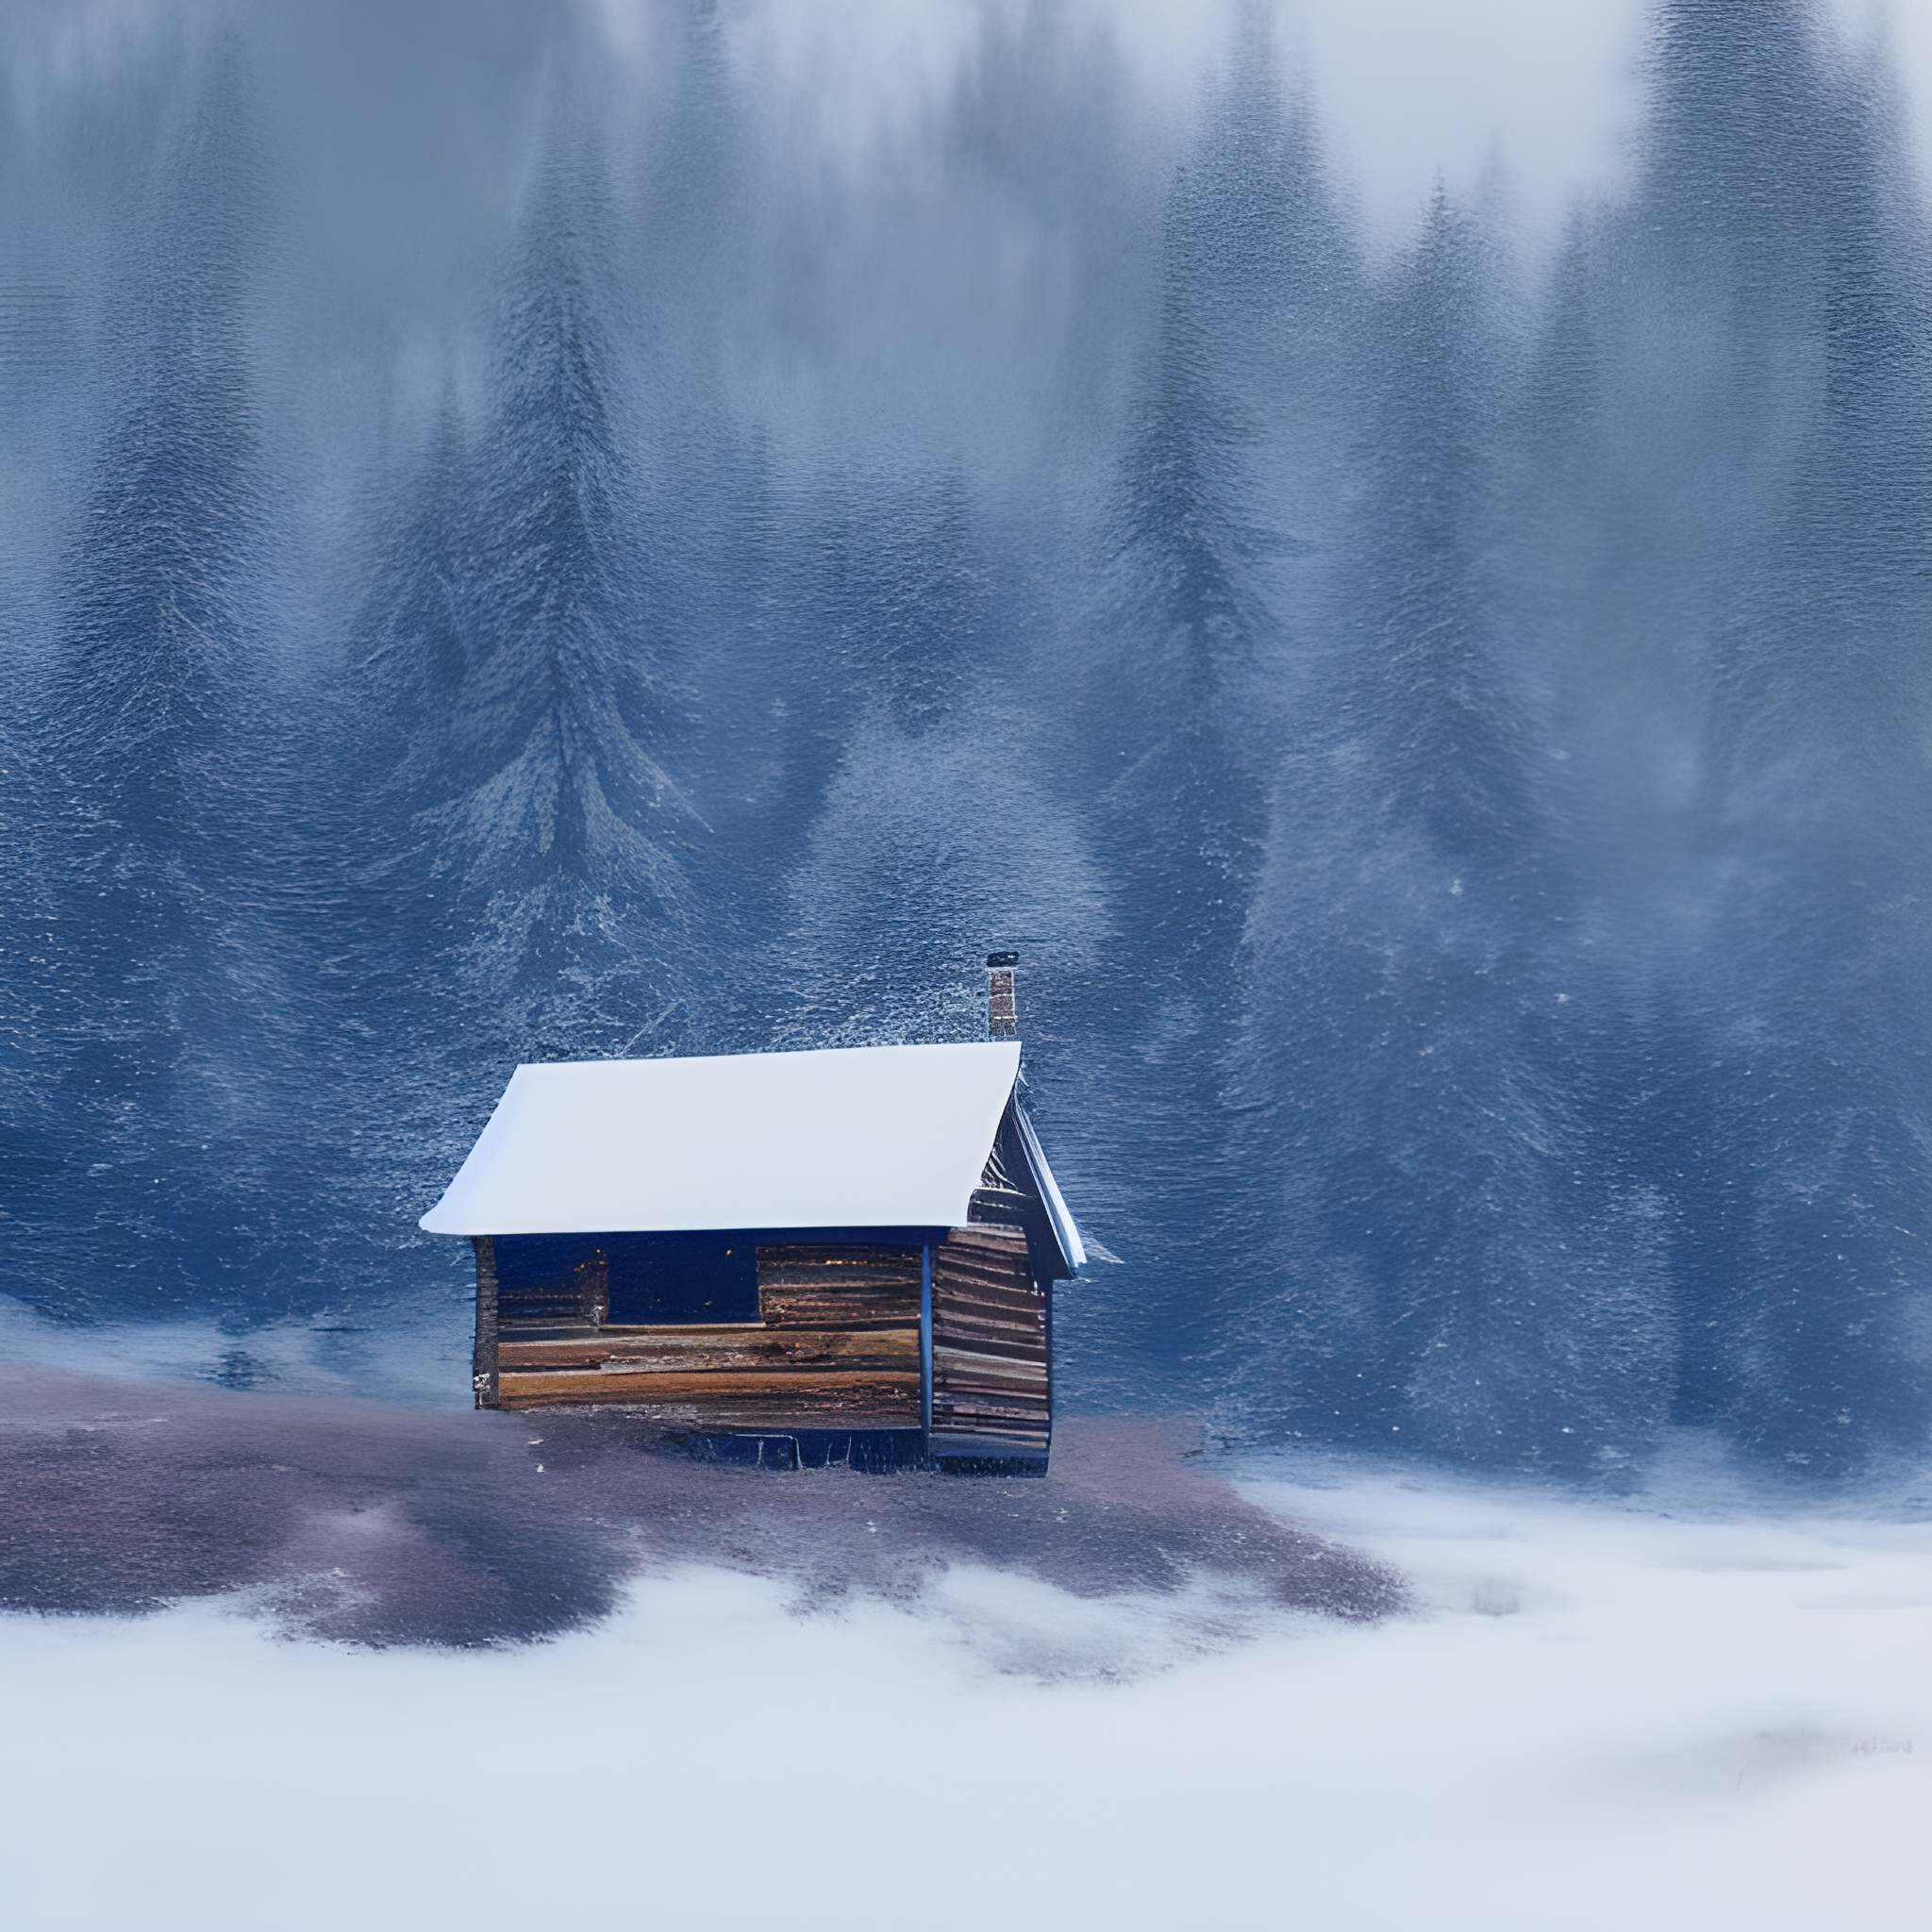 Image of a small house within a forest with snow all around.